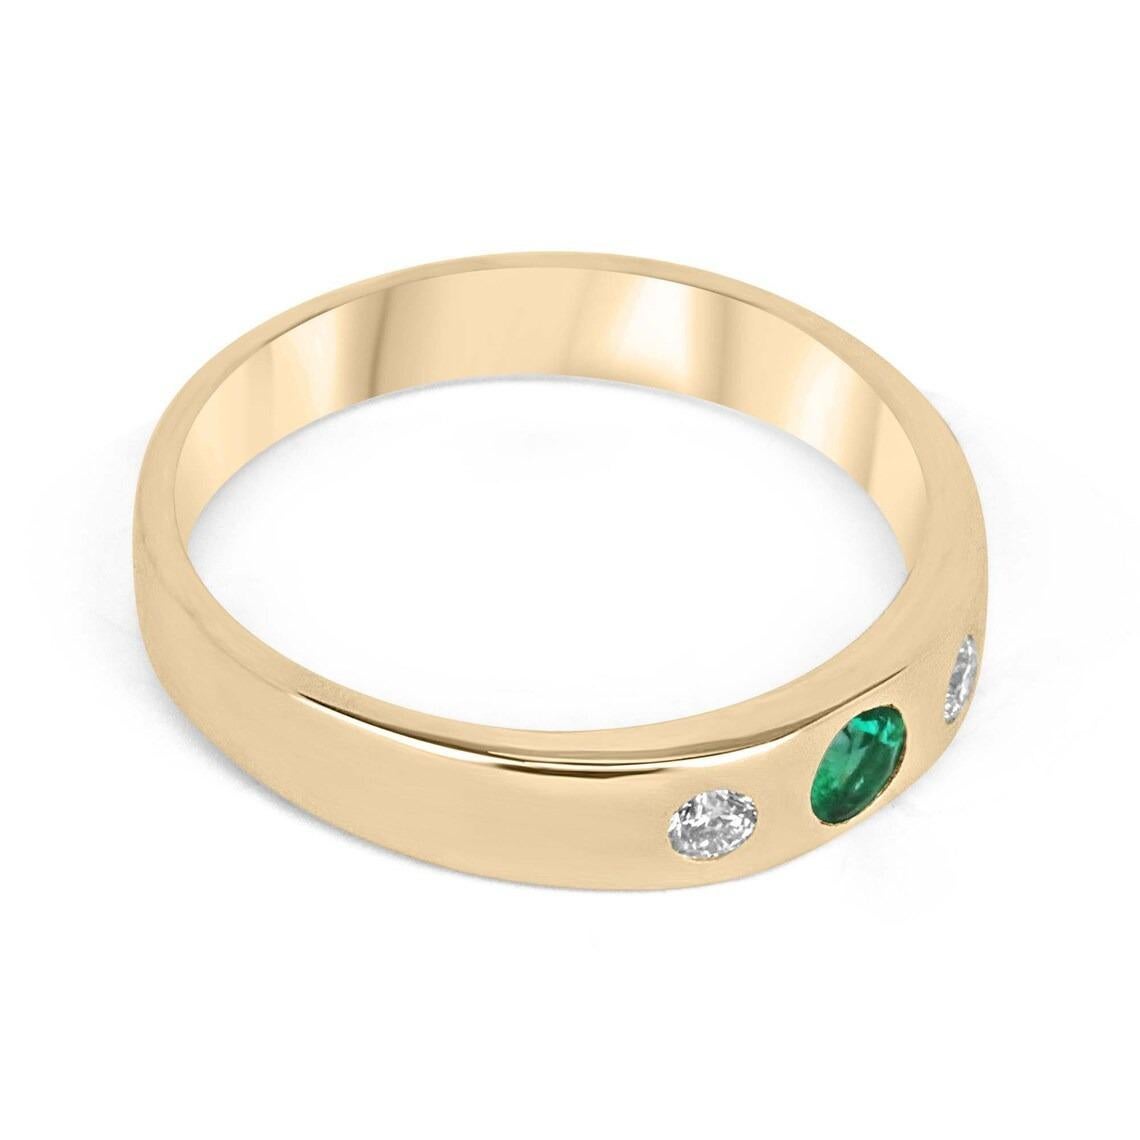 This band ring features a delicate round-cut emerald as its centerpiece, flanked by two brilliant round-cut diamonds that create a lovely three-stone look within the band. All three stones are securely bezel-set in 14k gold, adding durability and